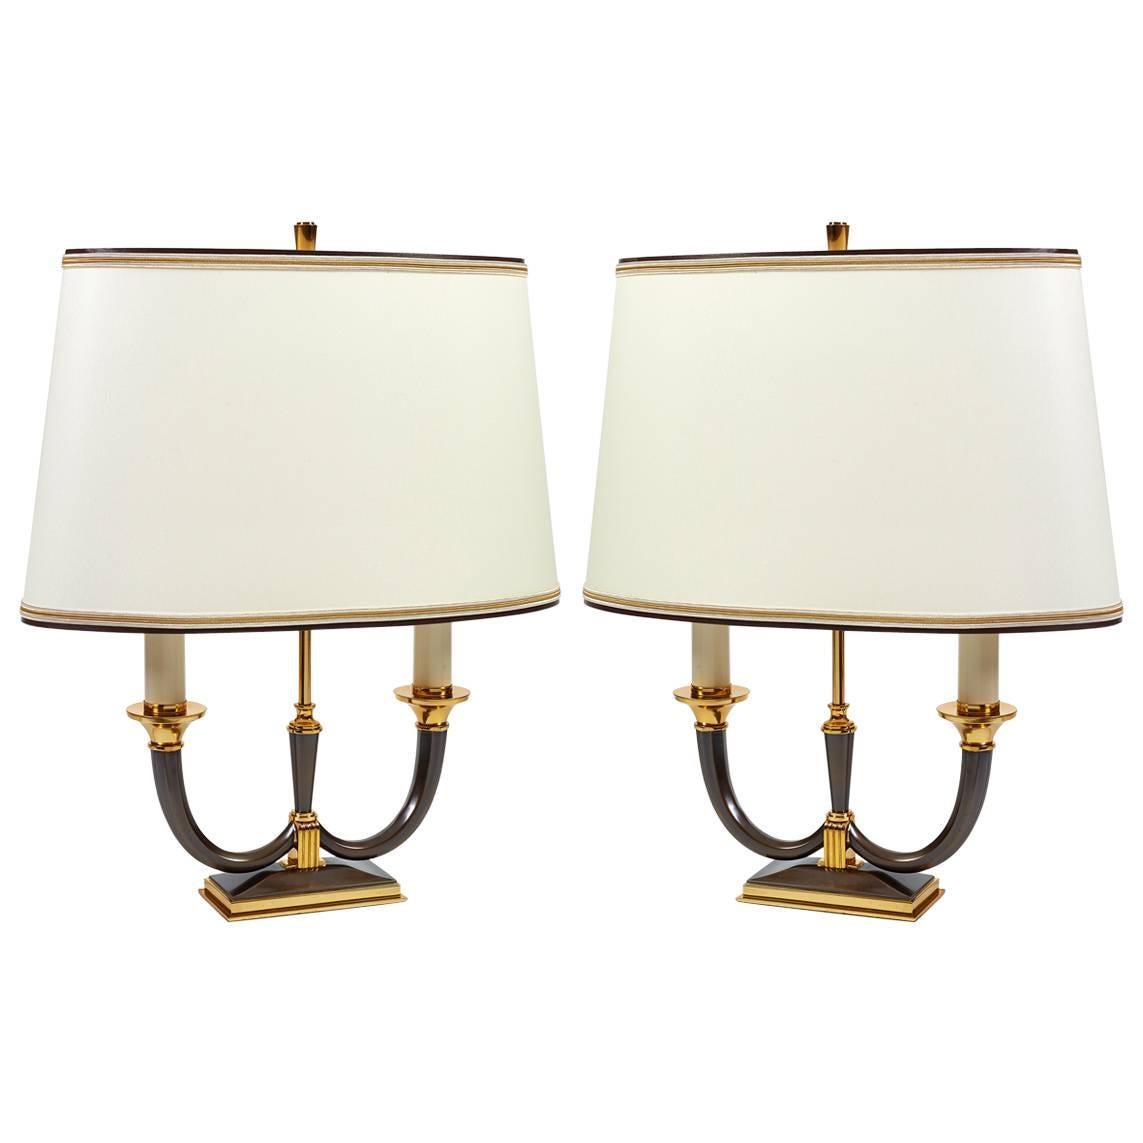 Elegant Pair of Faceted Bronze Lamps by Genet Michon